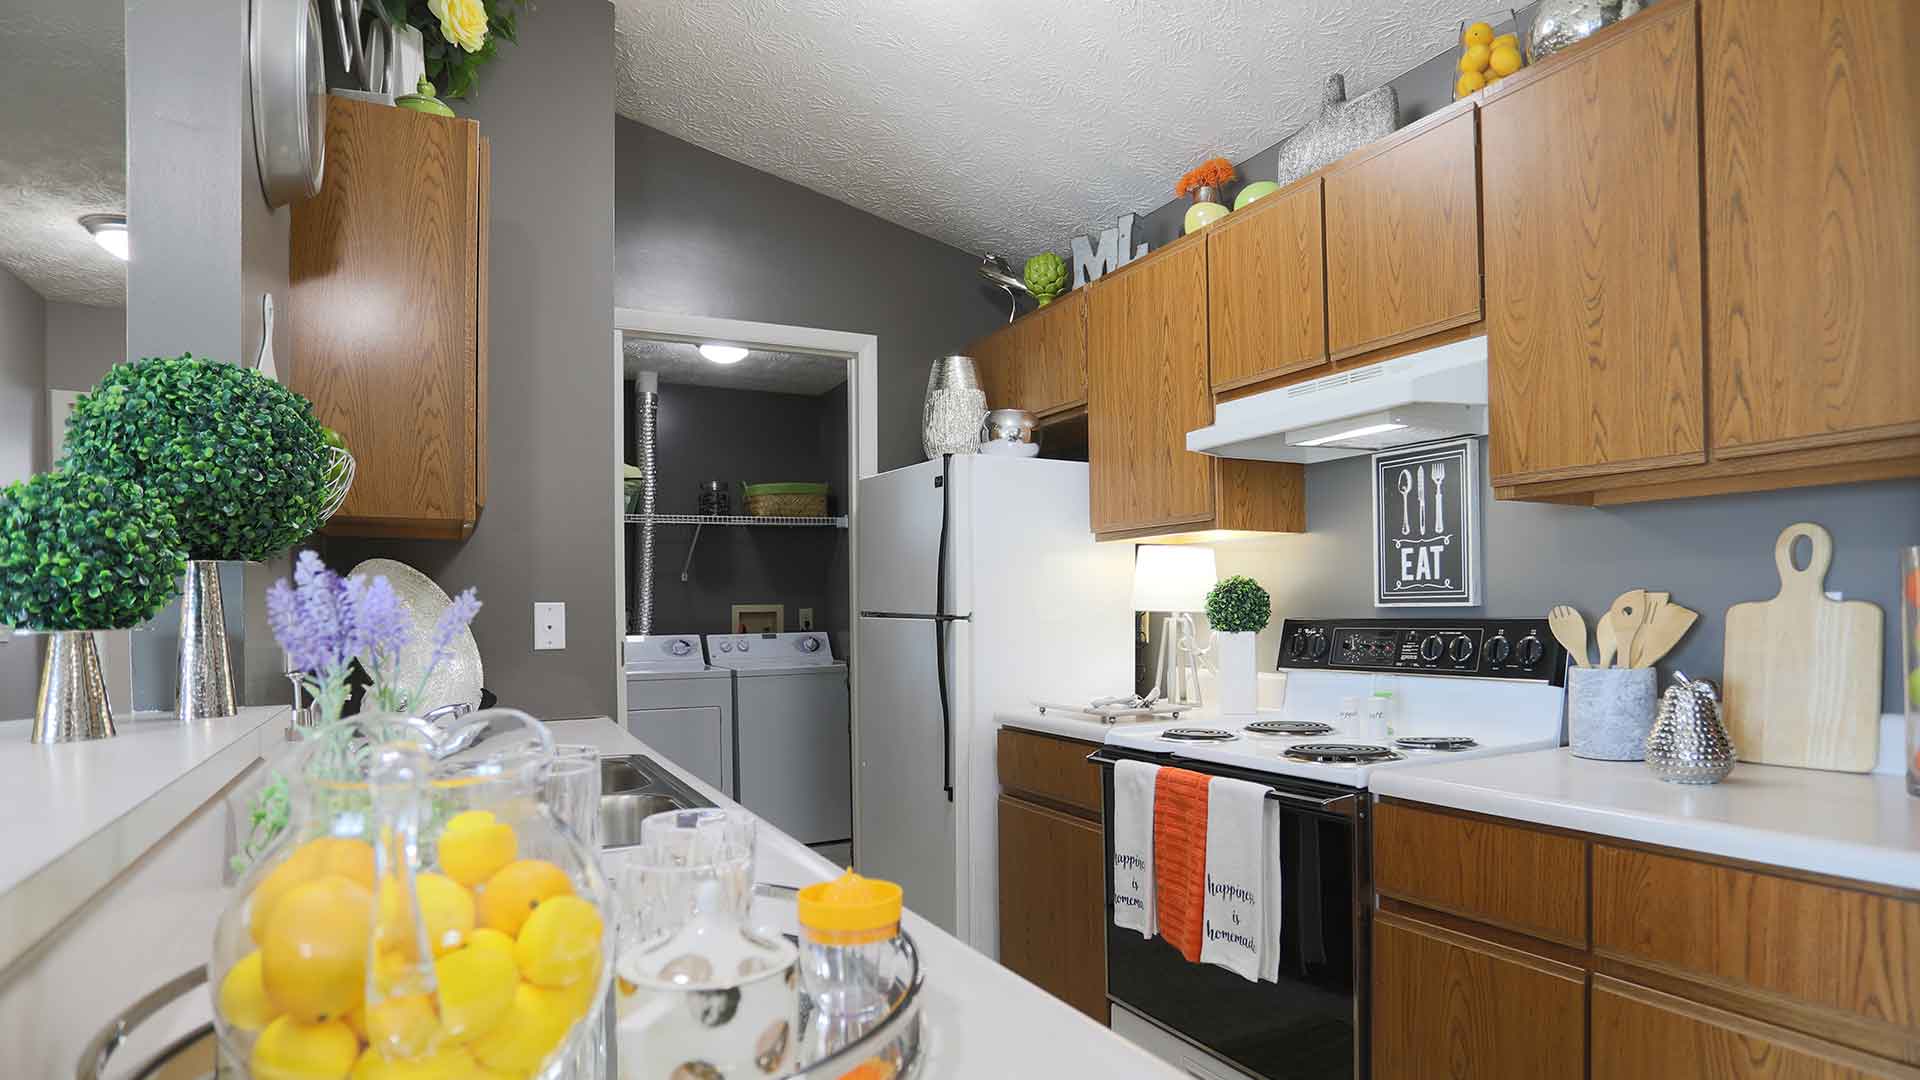 Kitchen with wooden cabinets and laundry room connection.